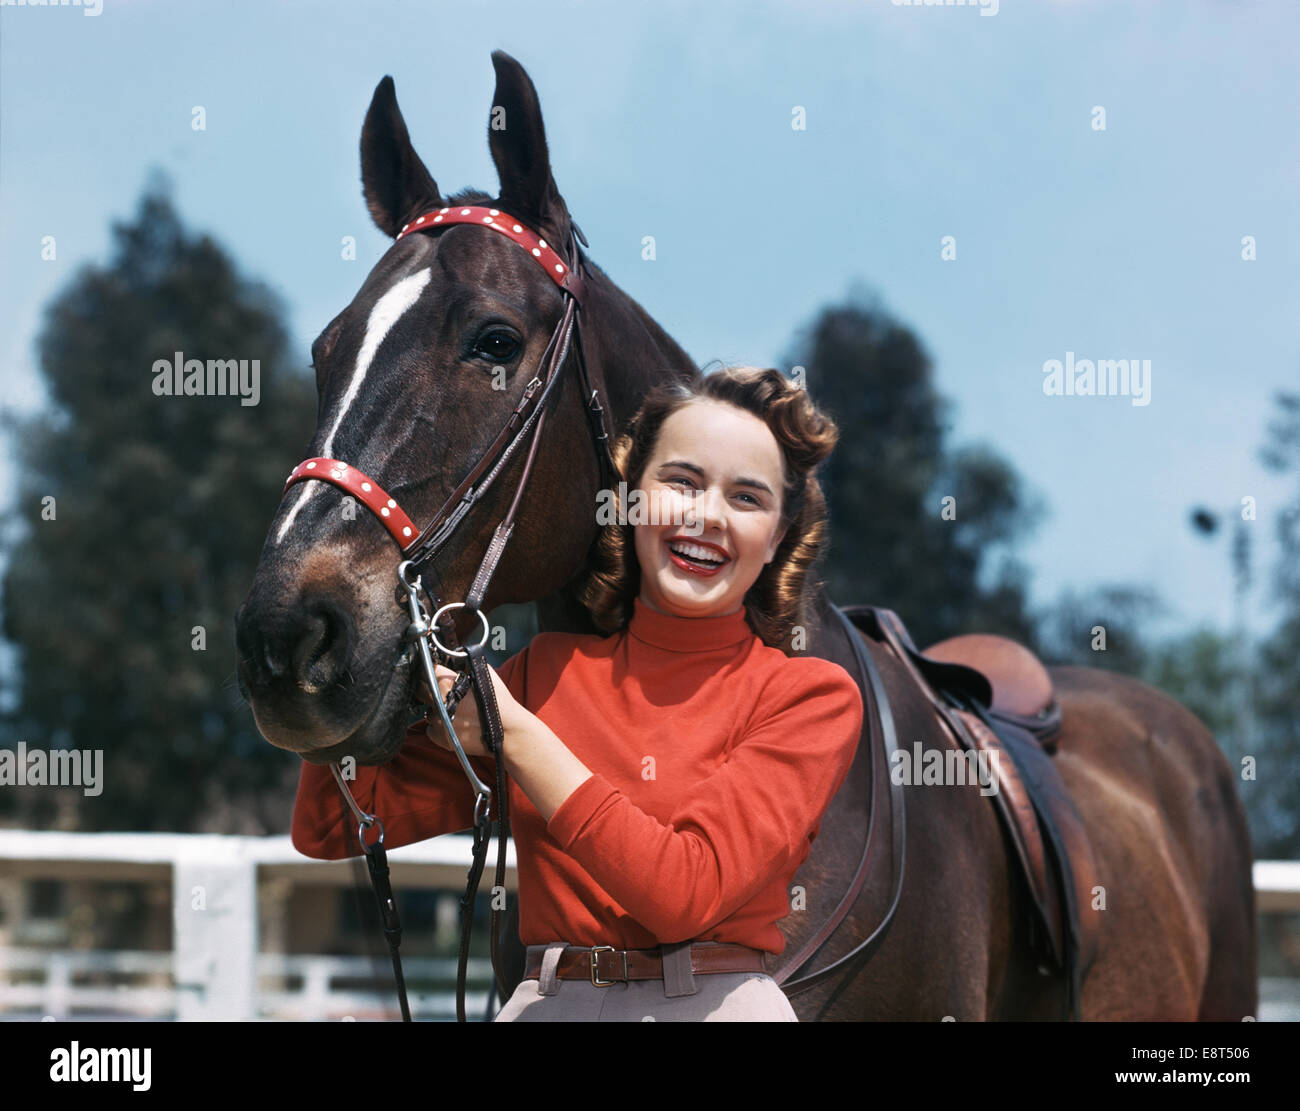 1940s 1950s SMILING TEEN GIRL POSING STANDING WITH HORSE Stock Photo